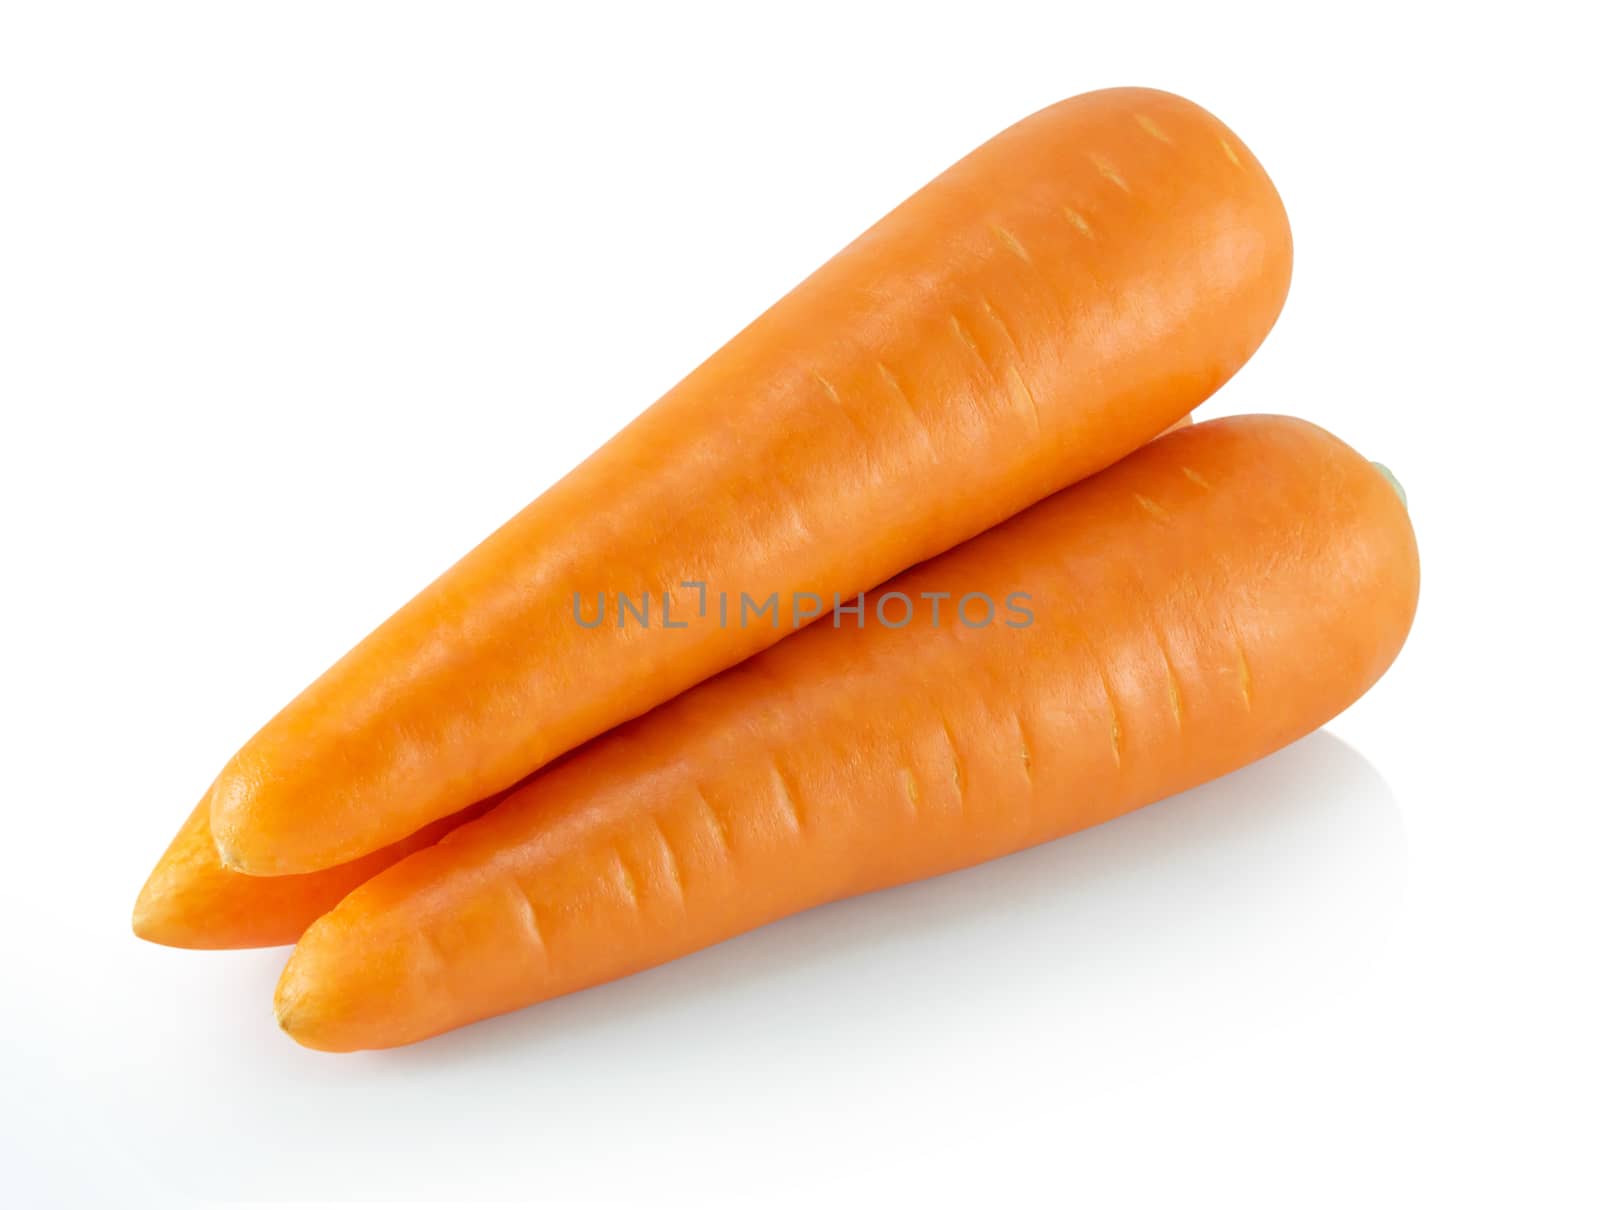 Fresh carrot isolated on white background, healthy diet food dri by pt.pongsak@gmail.com